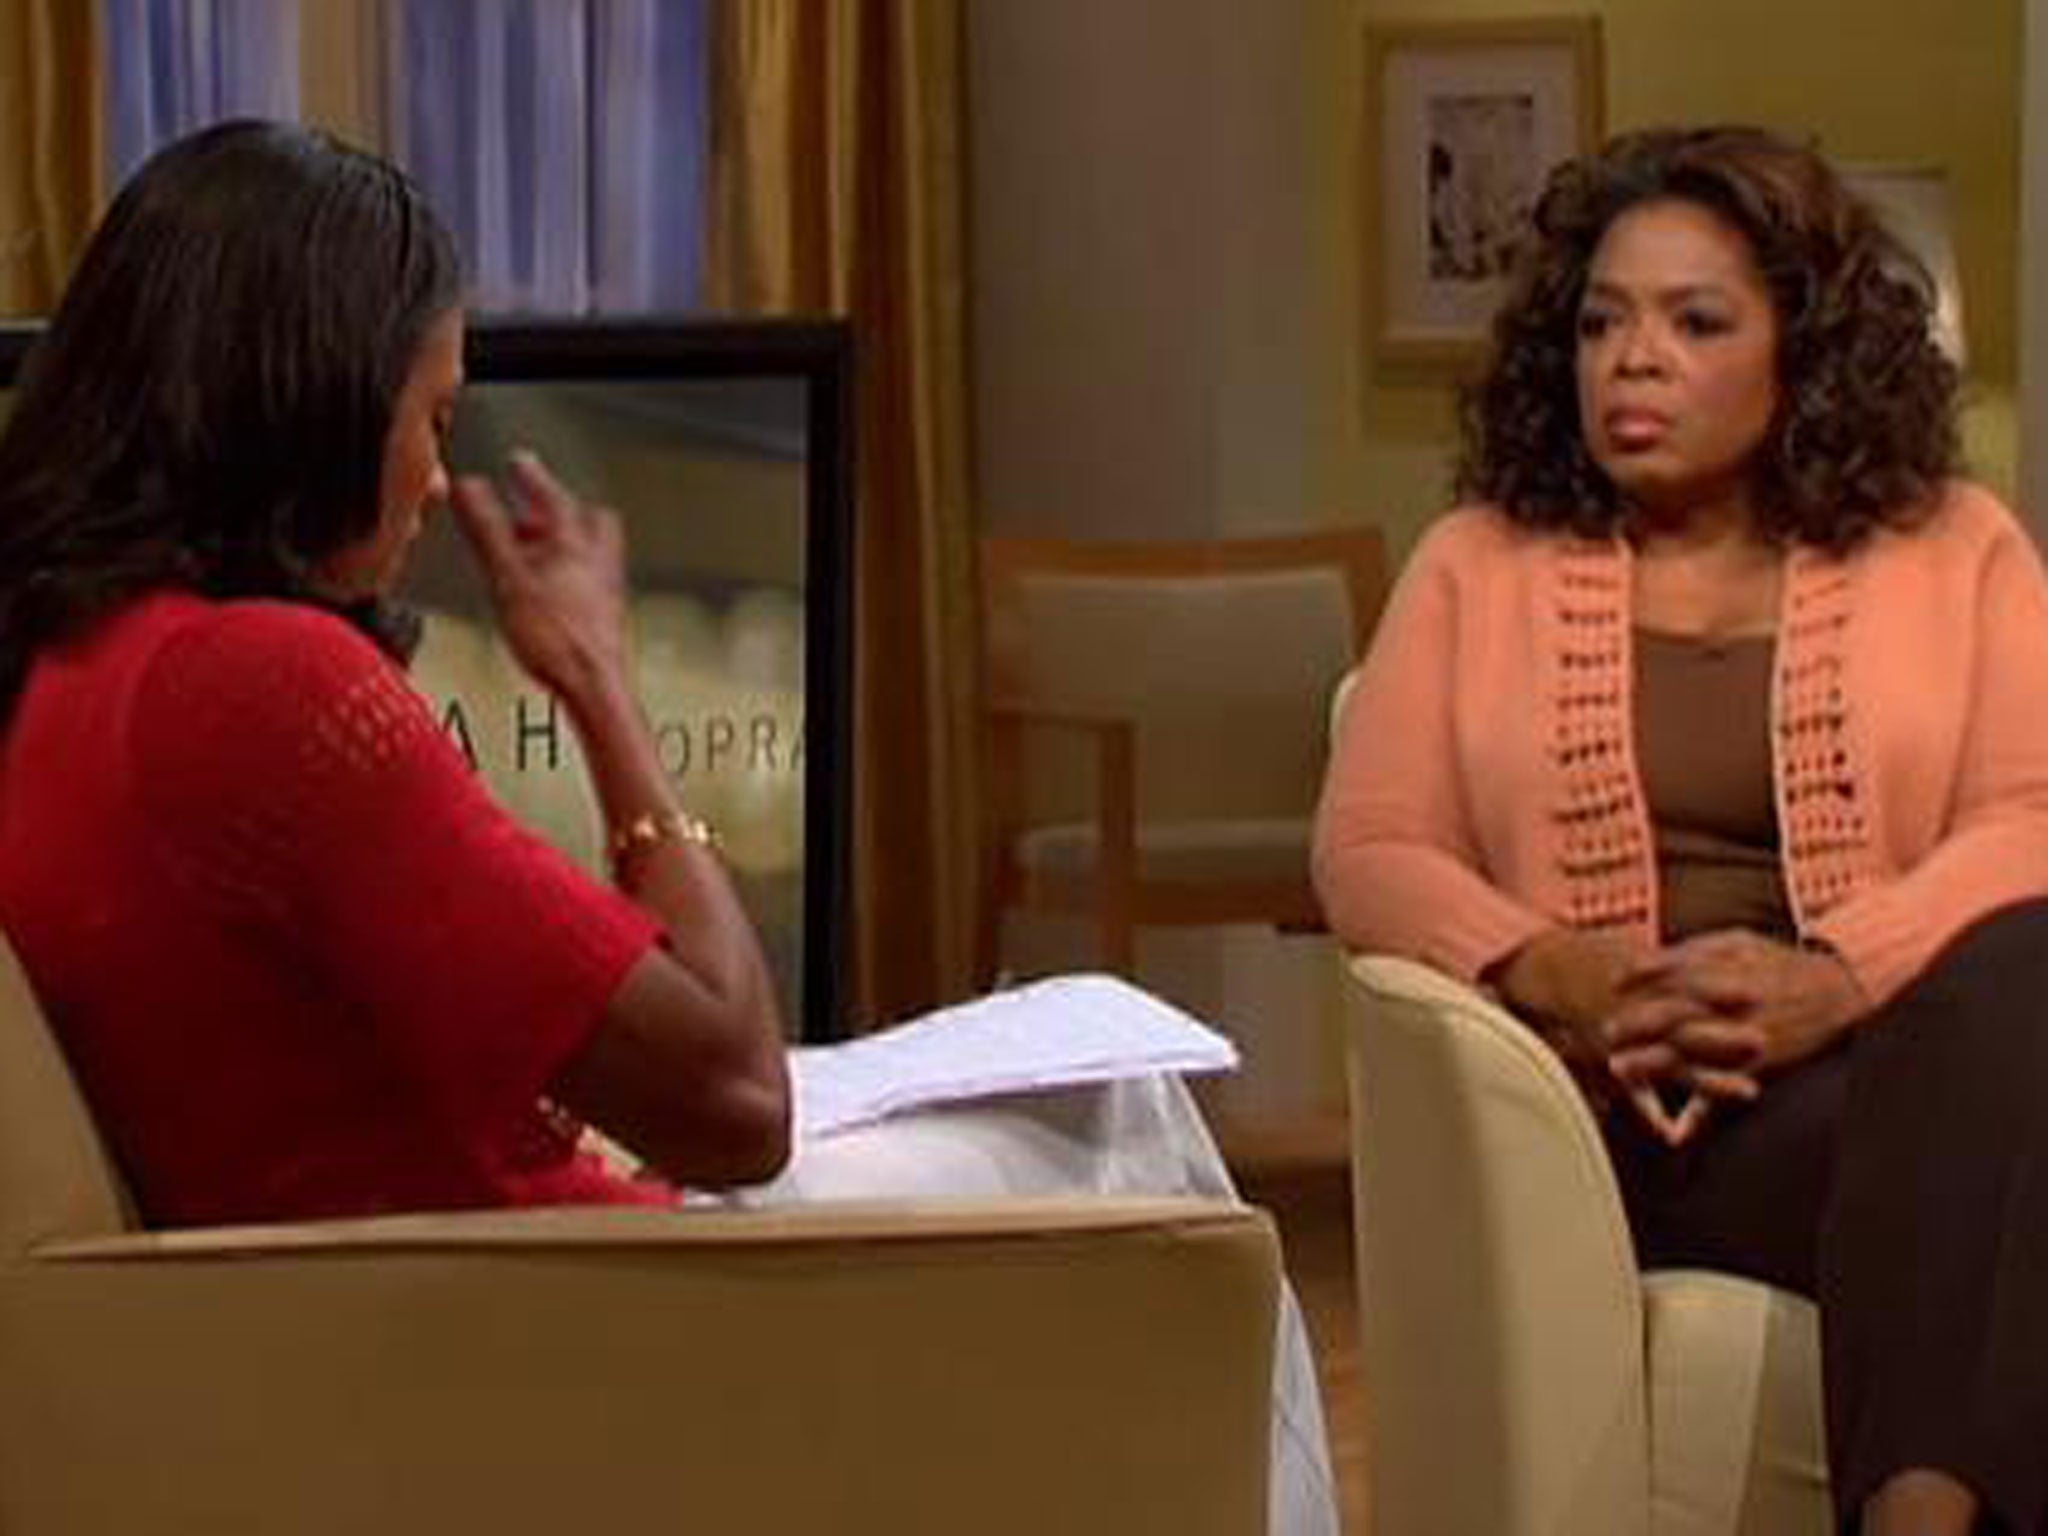 A tearful Marion Jones makes her appearance on Oprah in 2008